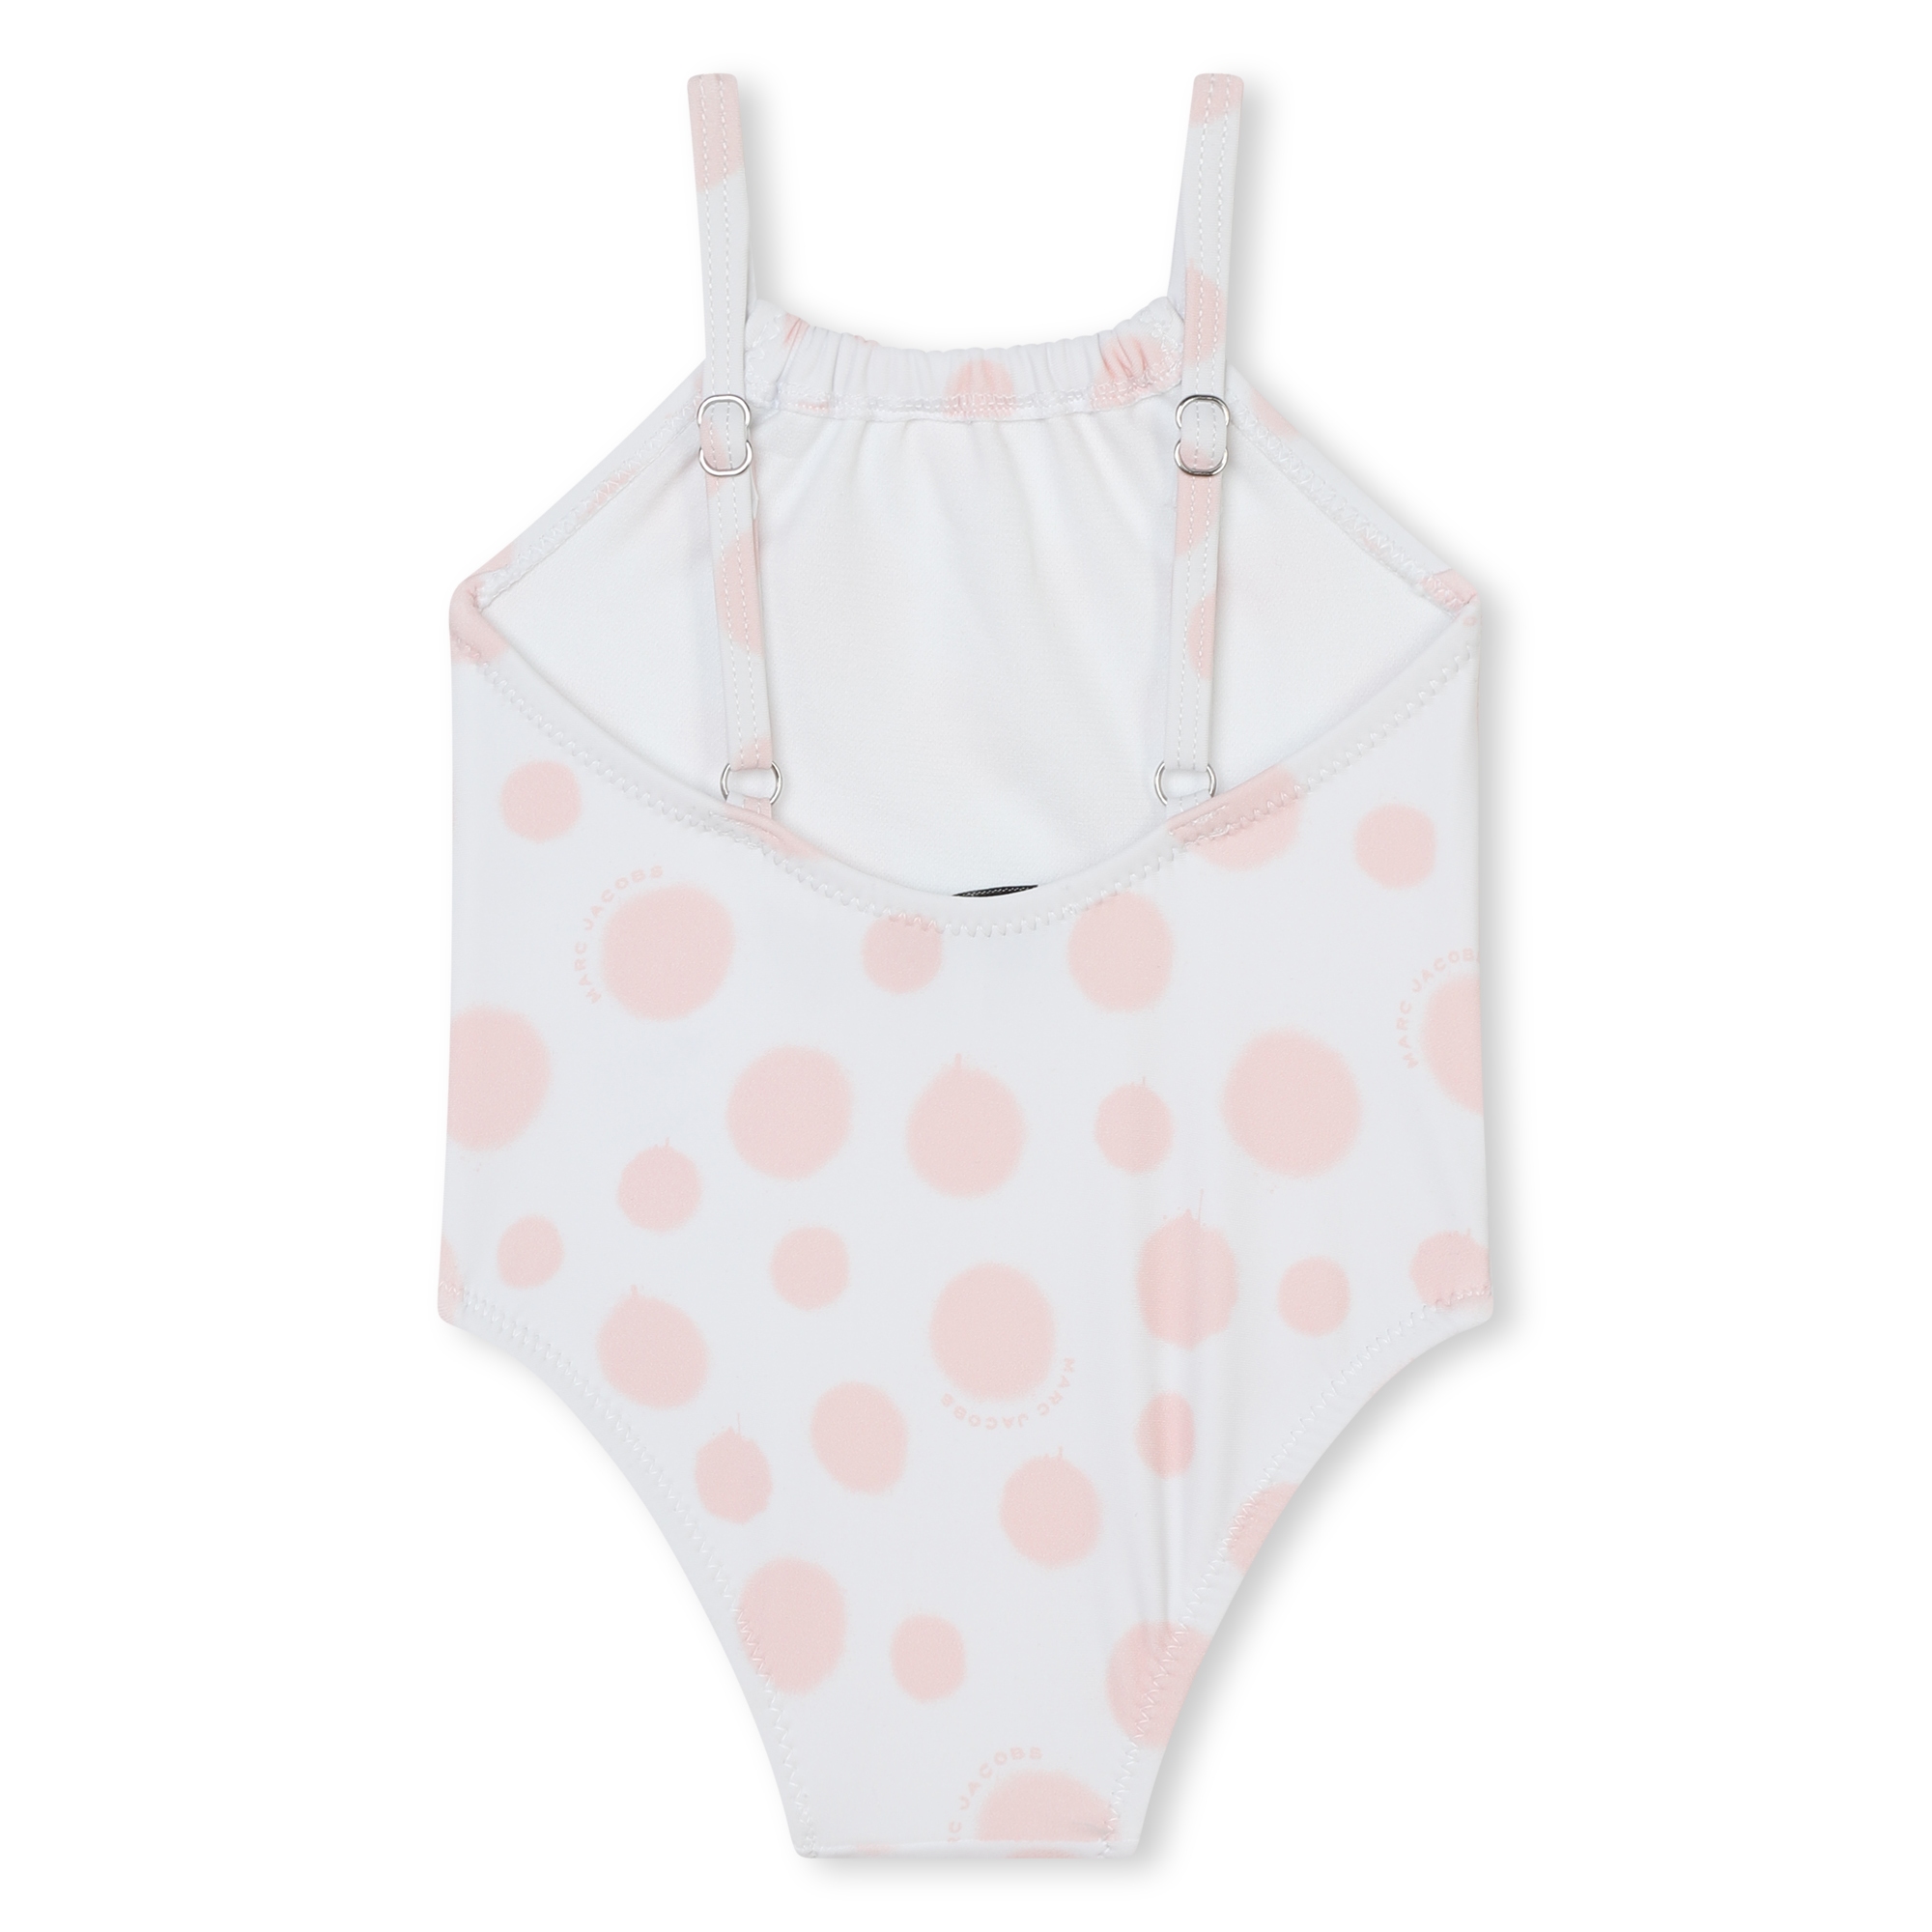 Polka dot 1-piece bathing suit MARC JACOBS for UNISEX